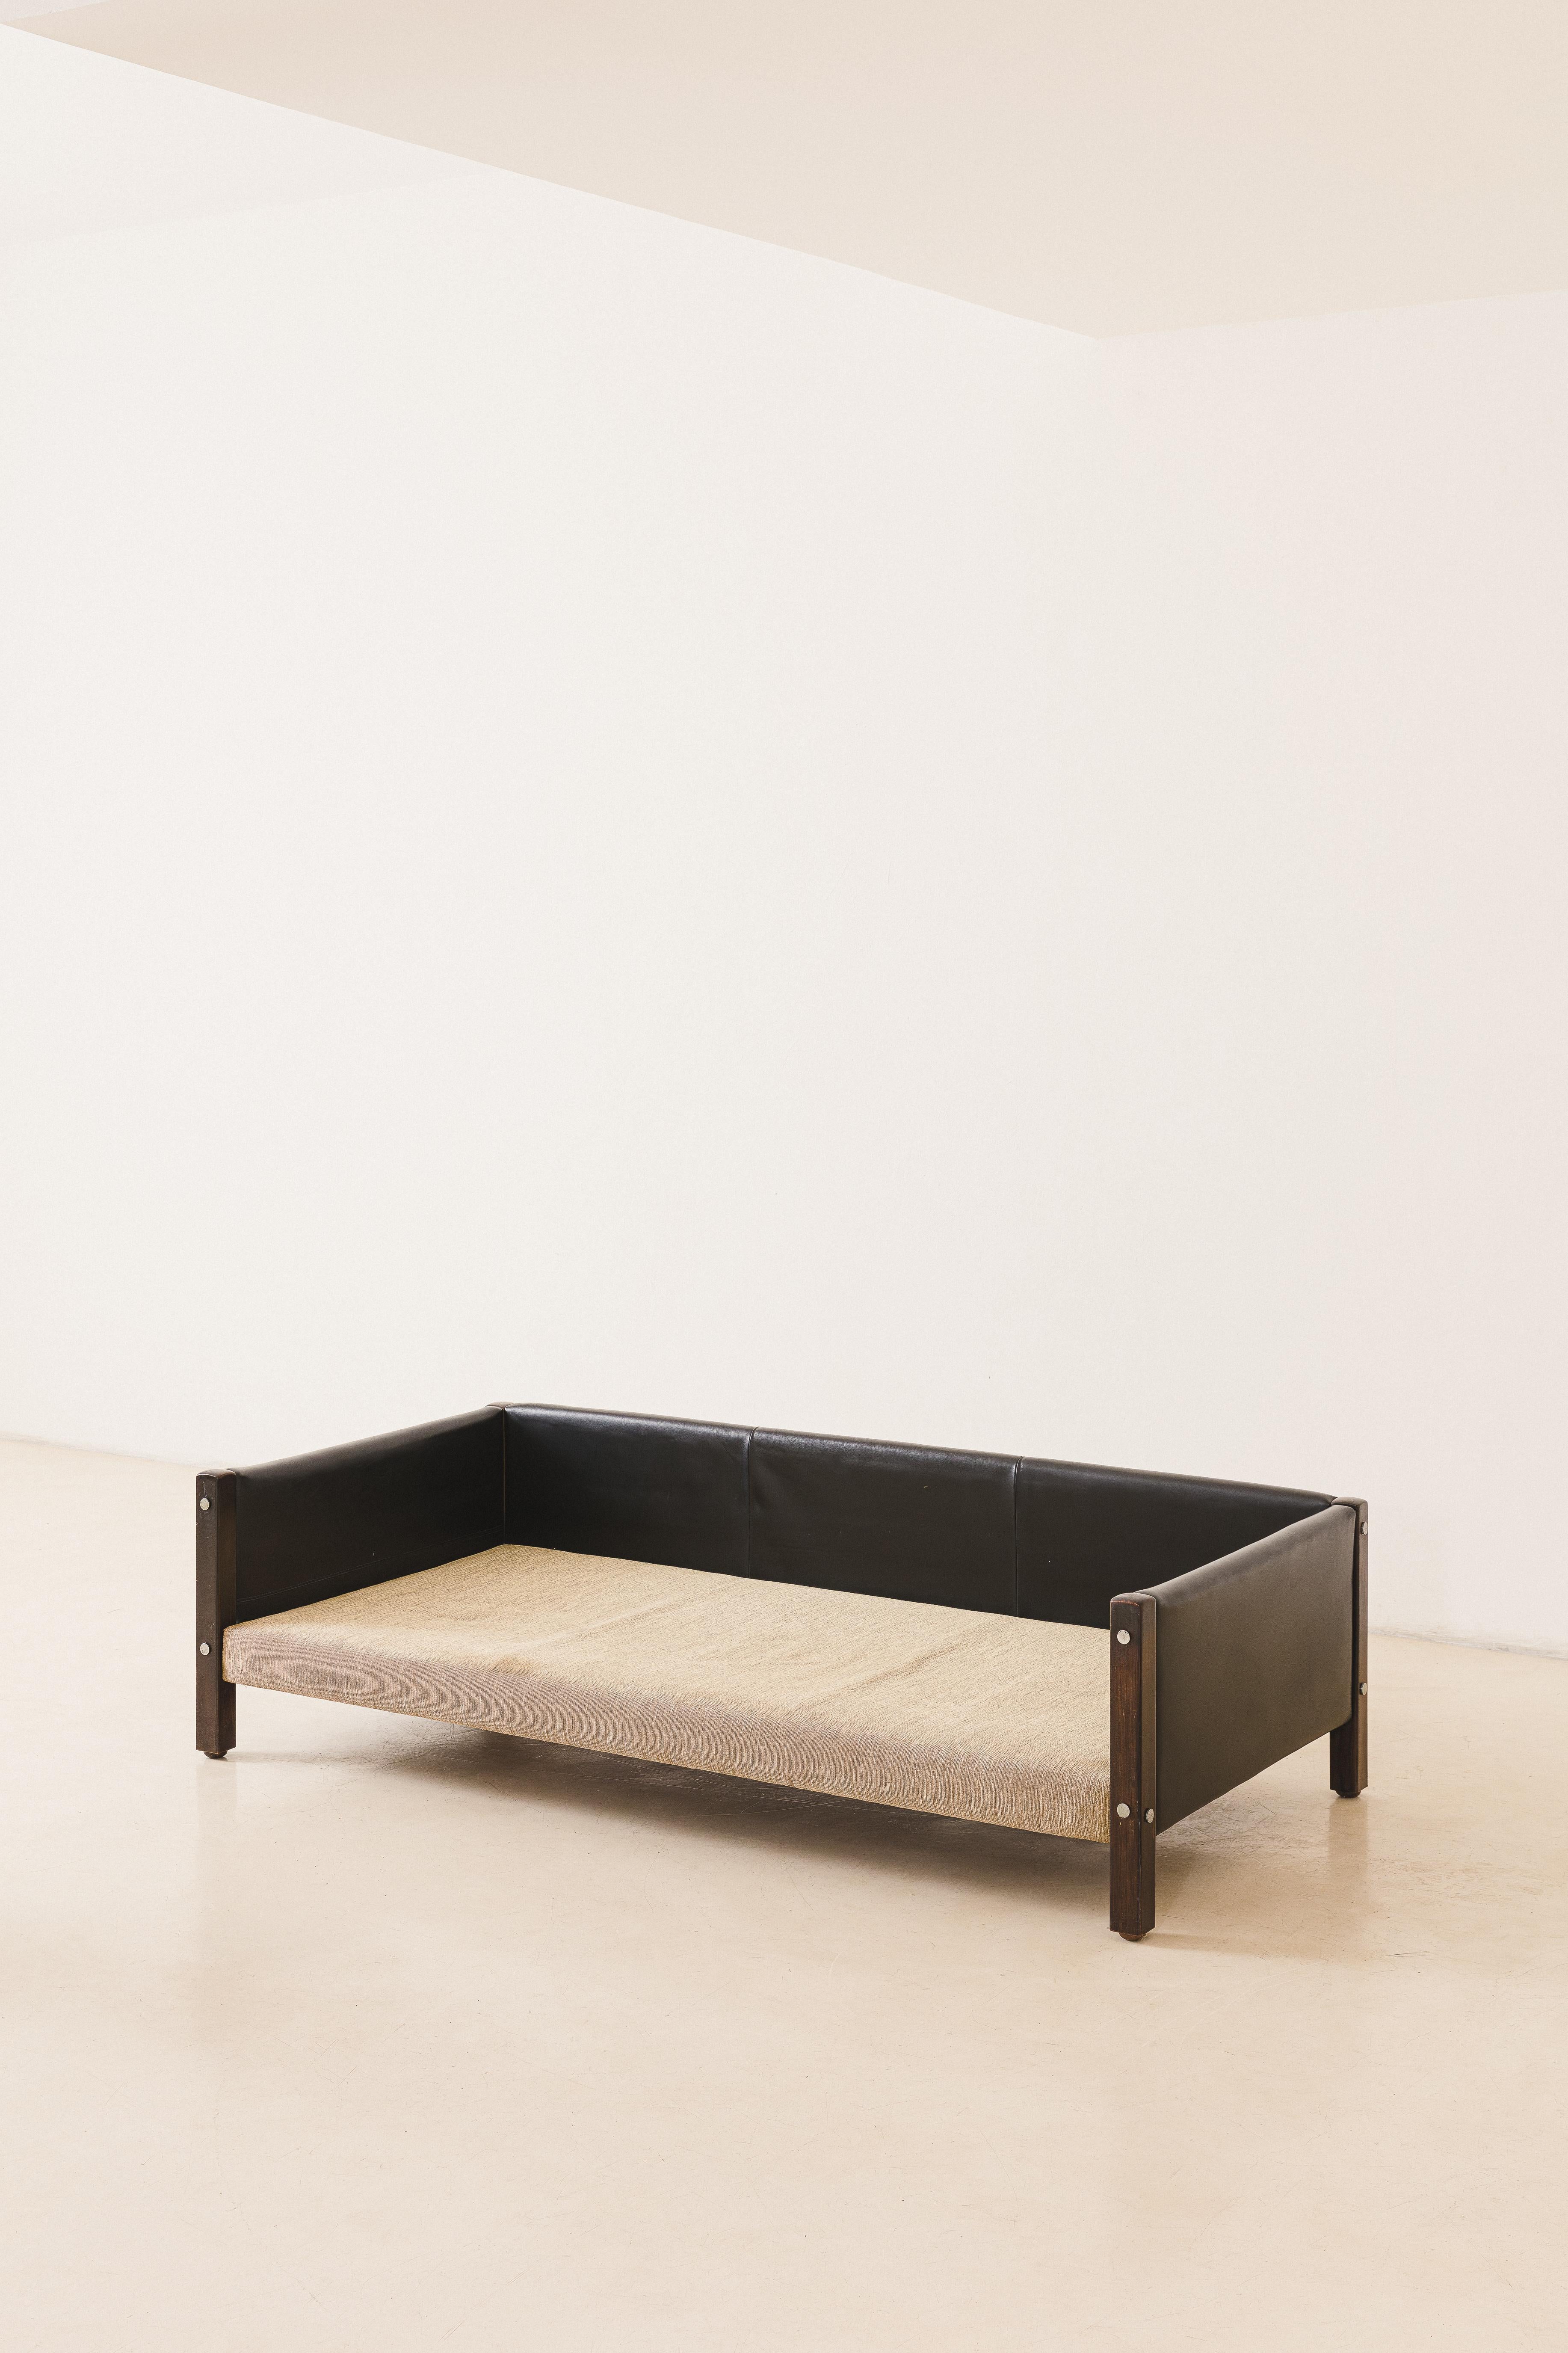 Rosewood Three-Seat Millor Sofa, Sergio Rodrigues Modern Design, Brazil, 1960s For Sale 1